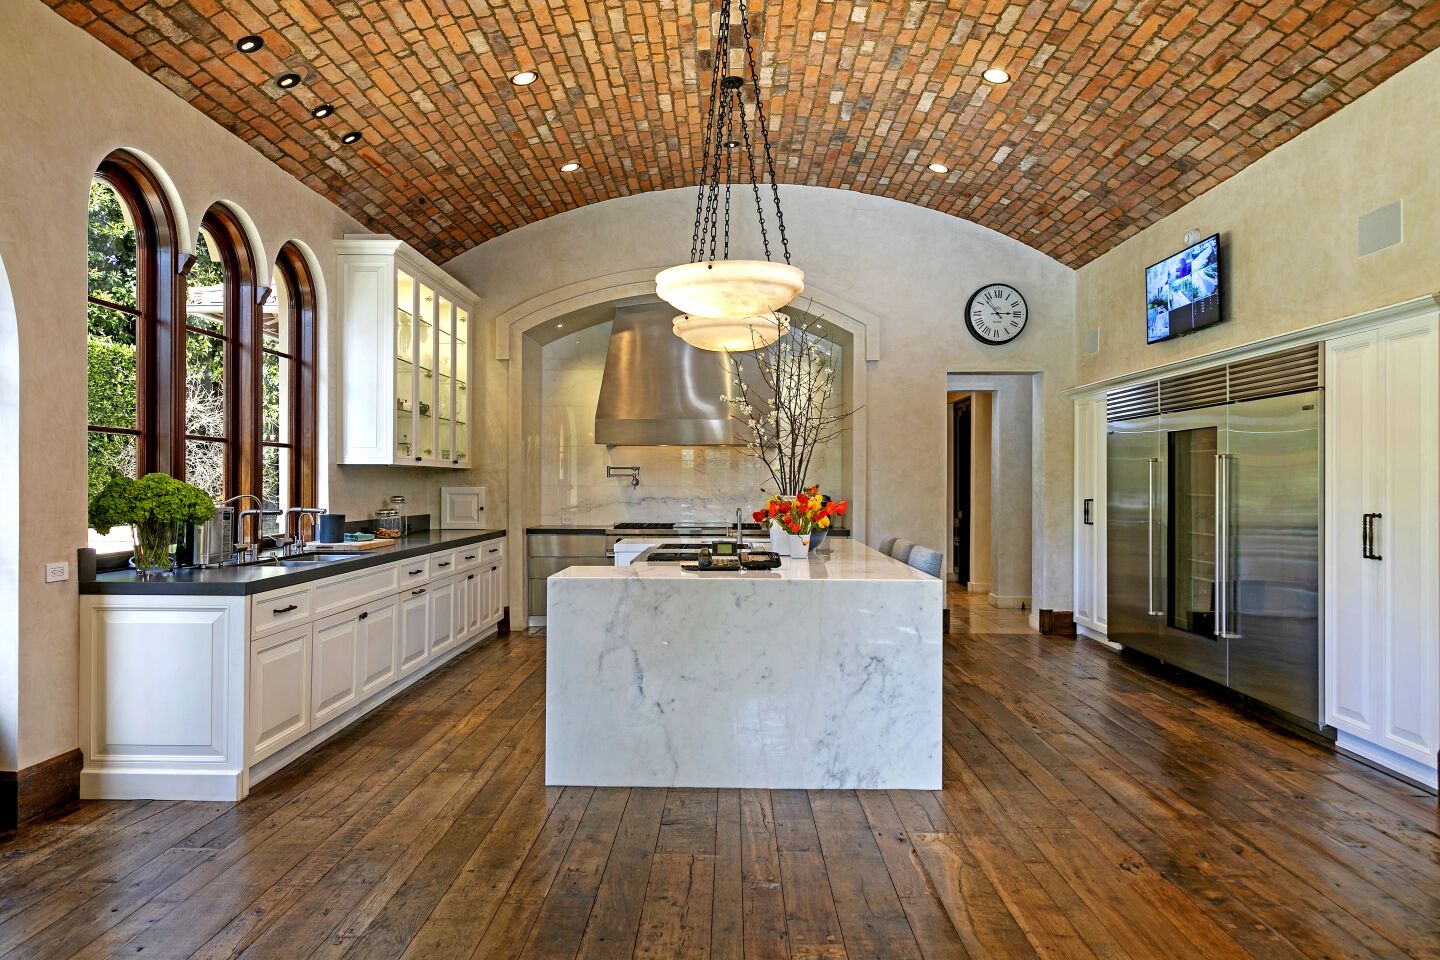 The chef's kitchen is topped by a brick barrel ceiling.